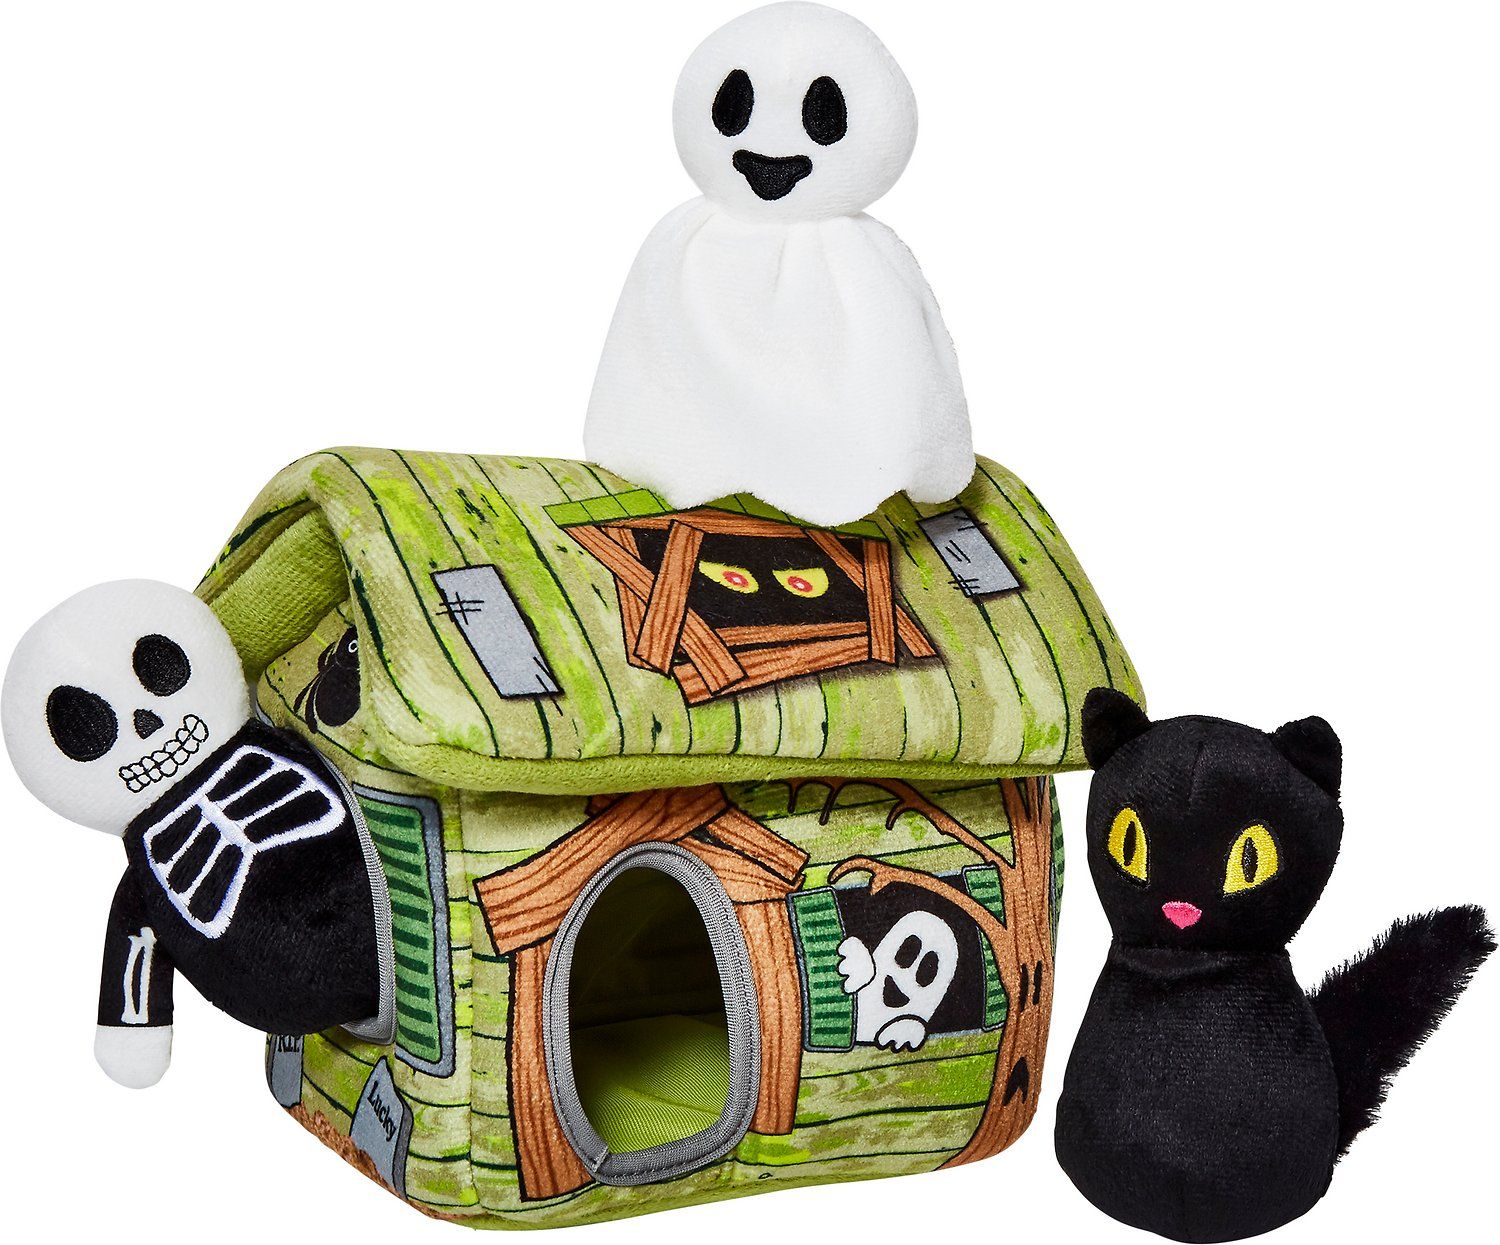 Haunted Shack Hide and Seek Dog Toy